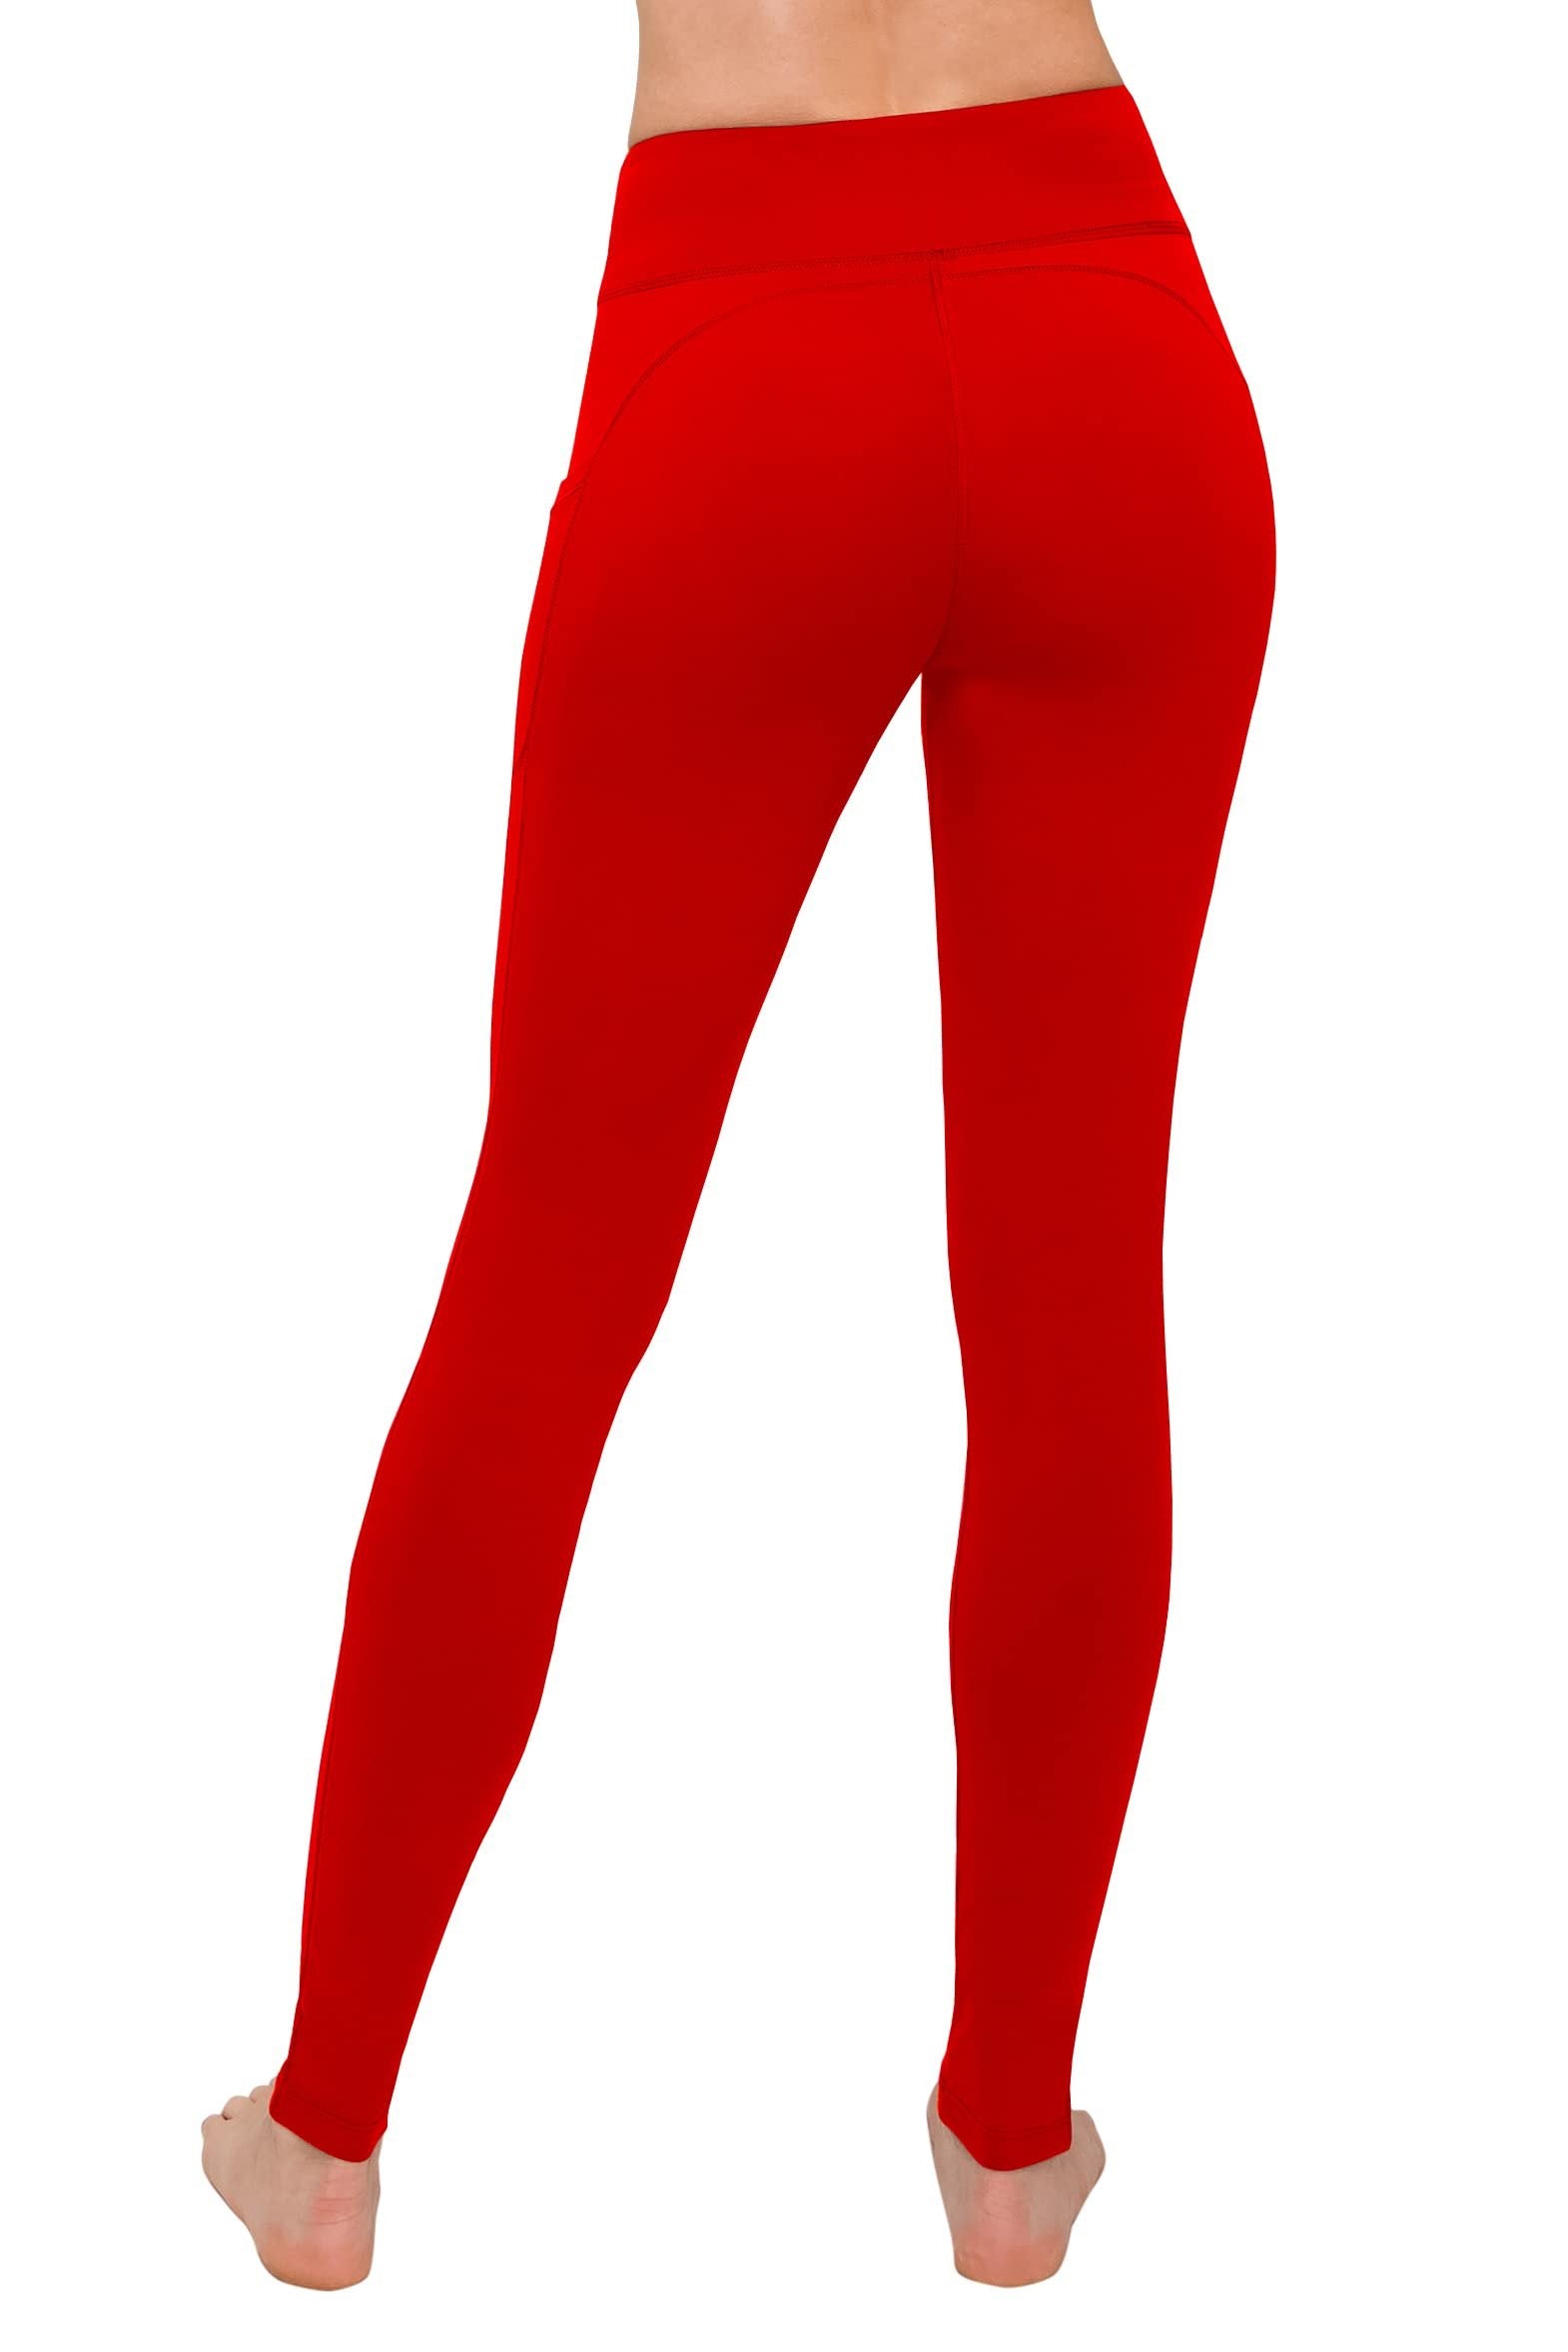 Red SATINA High Waisted Leggings with Pockets - Plus & Regular Size - 3 Waistband - Free Shipping